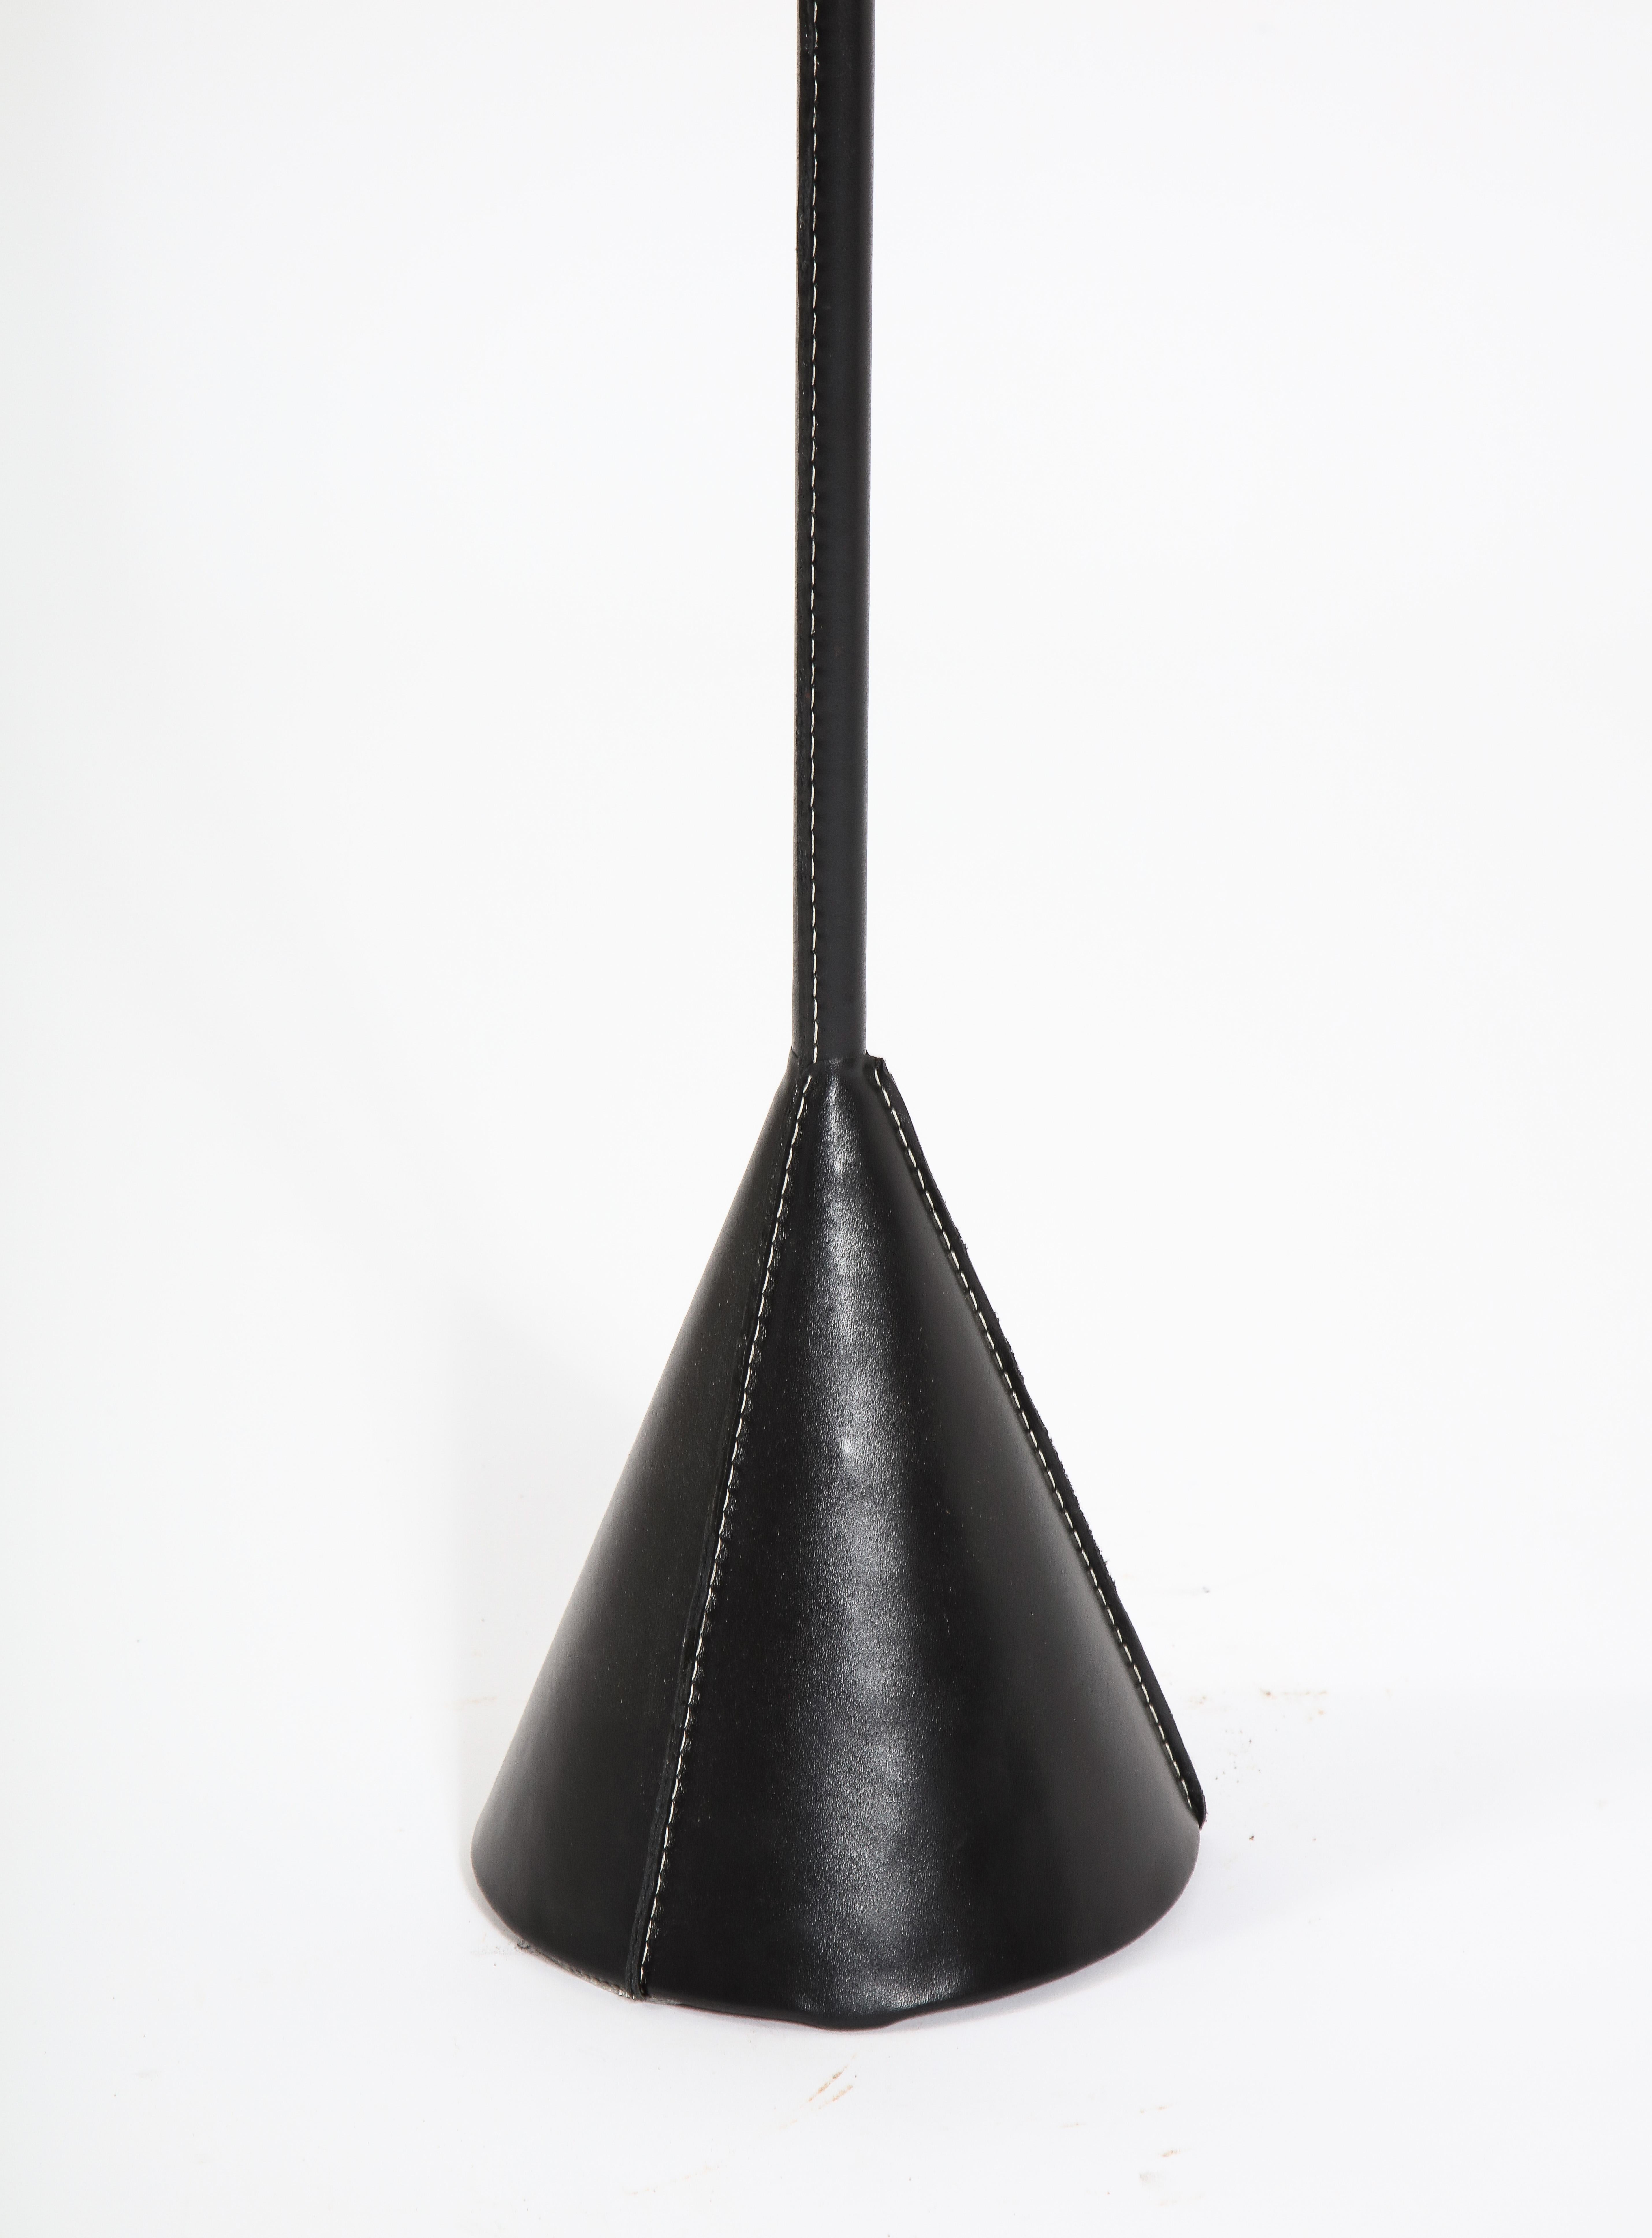 Jacques Adnet Dual Cone Floor Lamp. France, 1950s 5